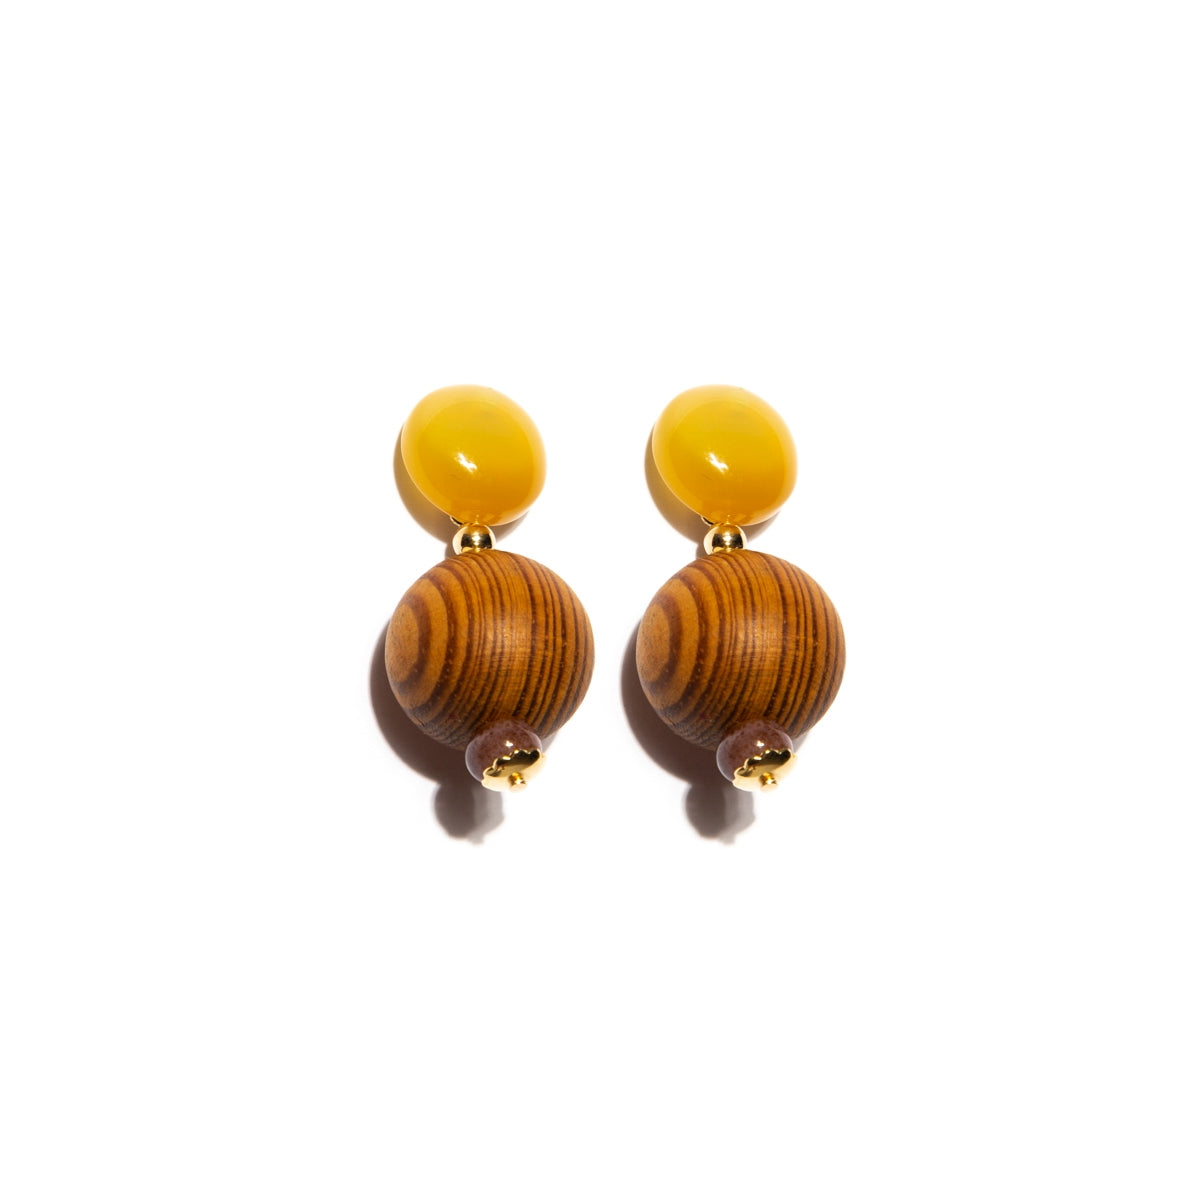 Medium Gold-Plated Earring with Wood, Ceramic and Agate